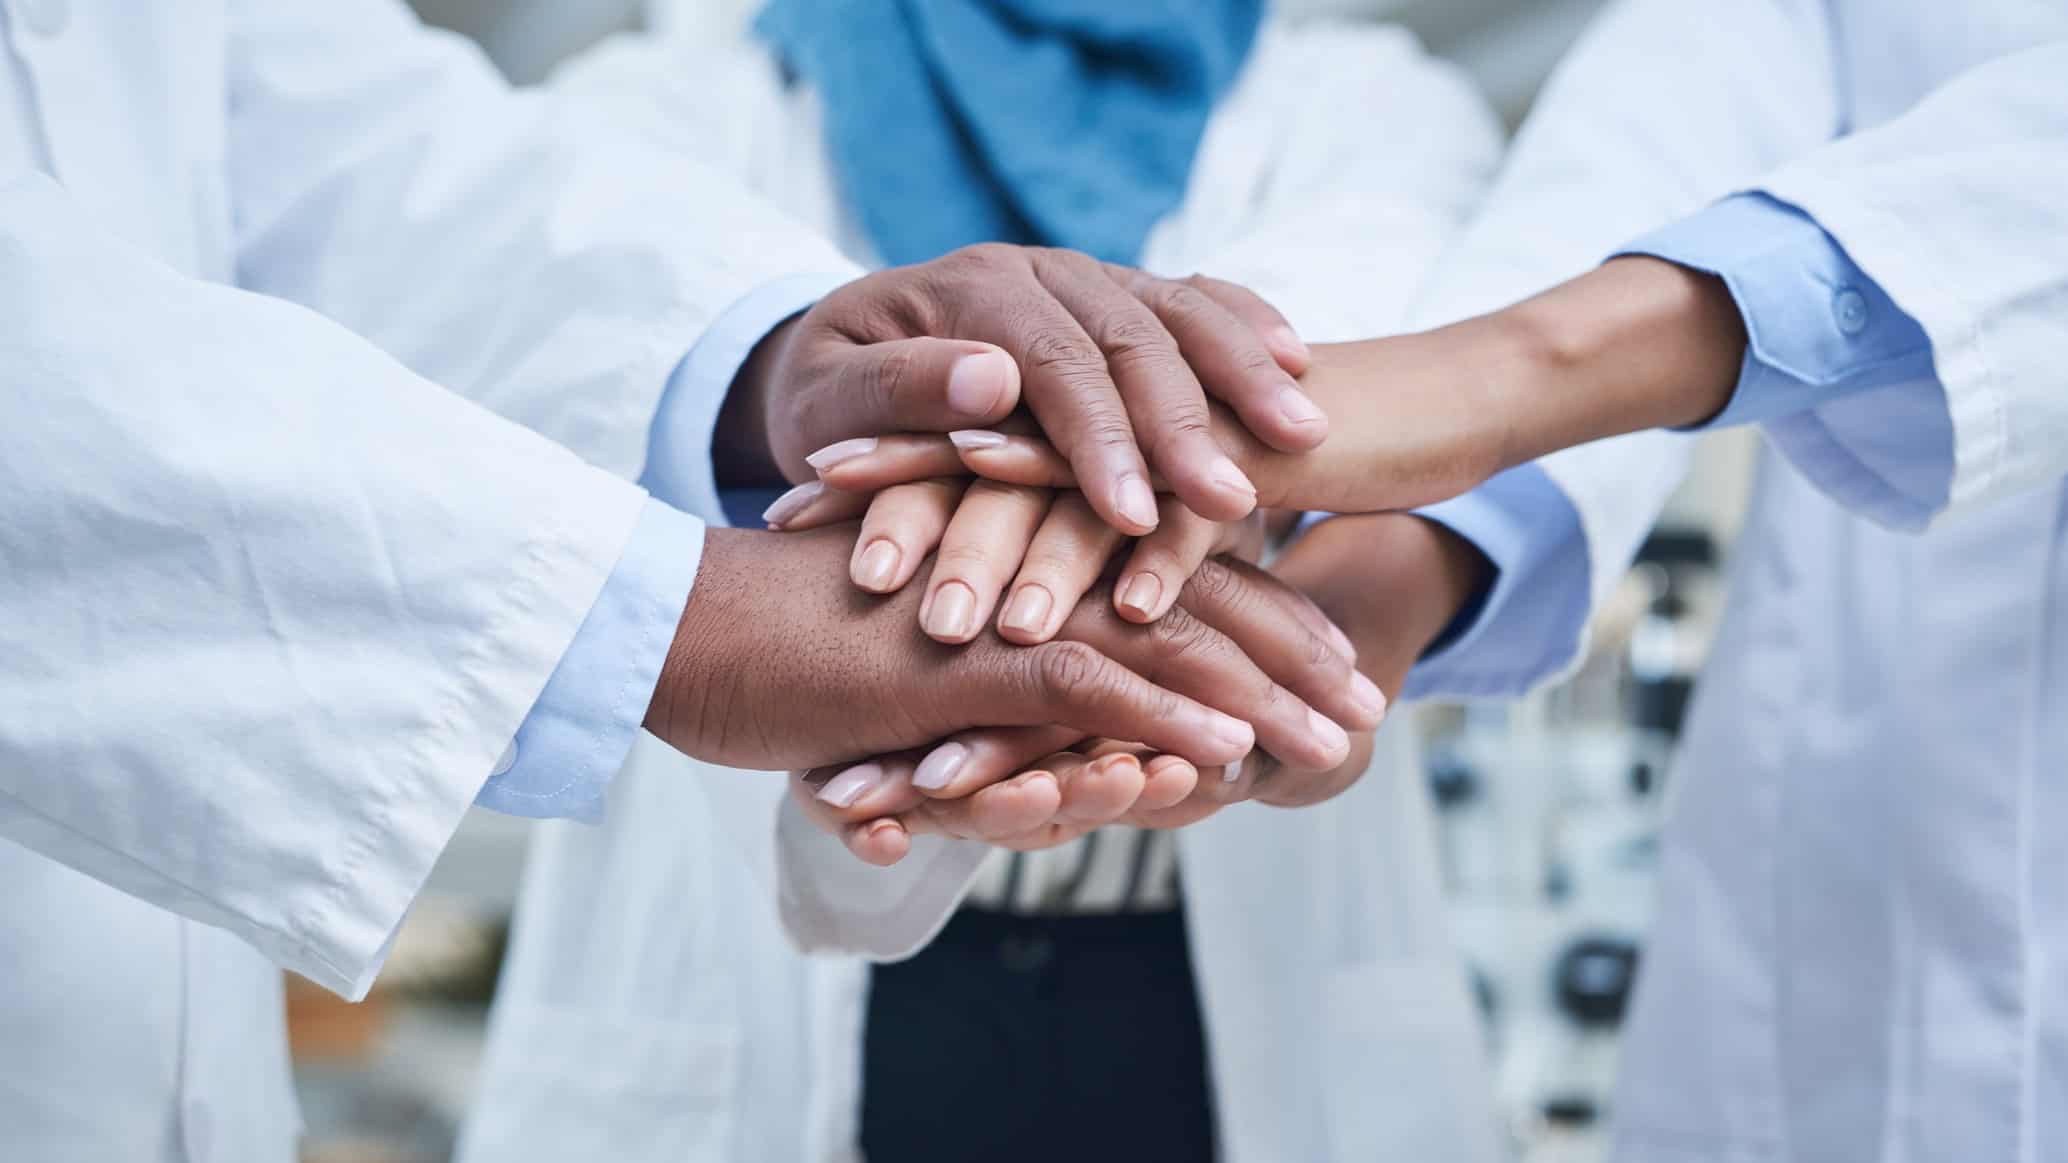 Medical or healthcare workers grasp hands in the universal expression of teamwork